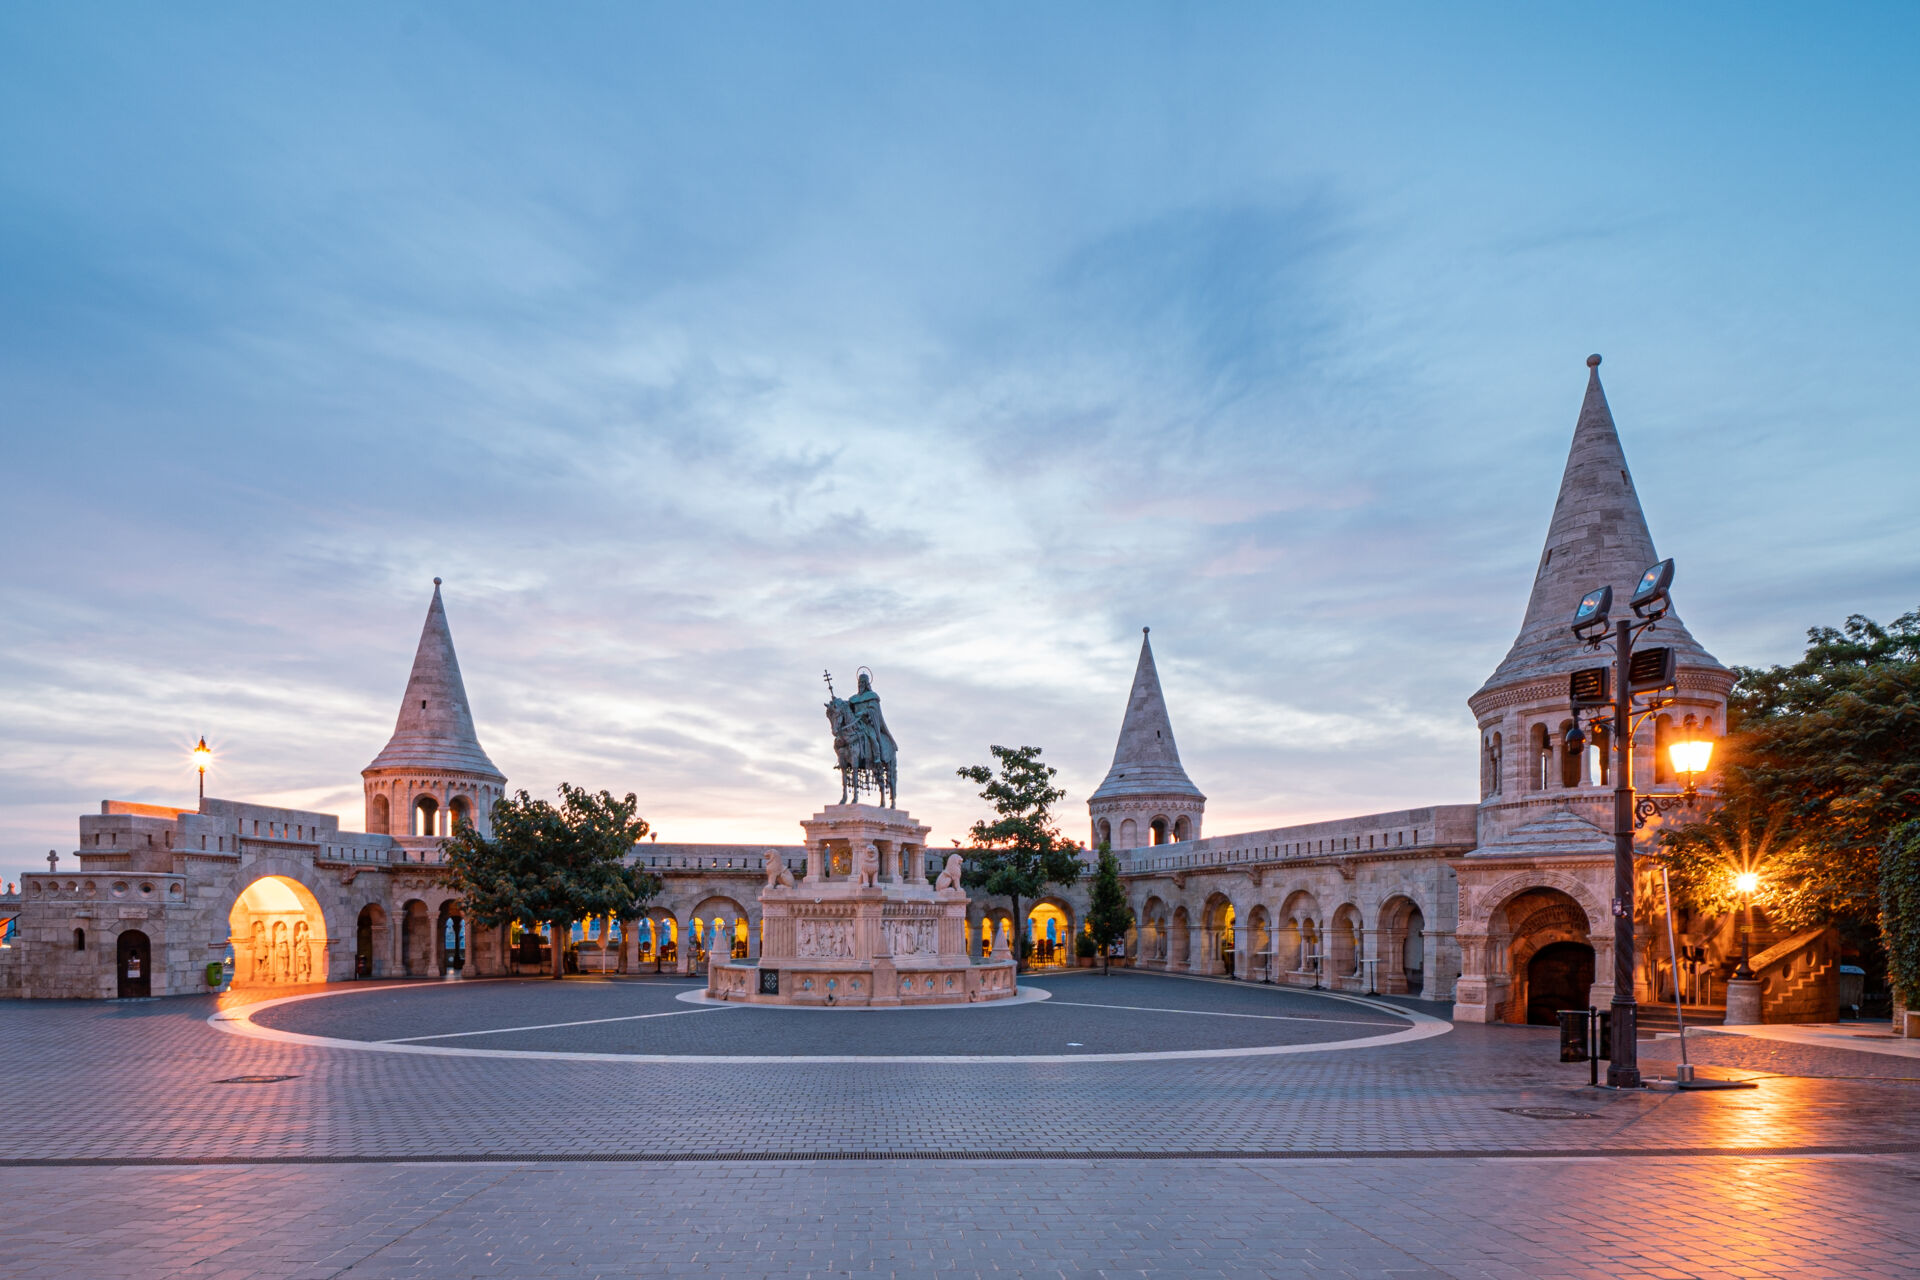  Fisherman’s Bastion, an iconic landmark in Castle District